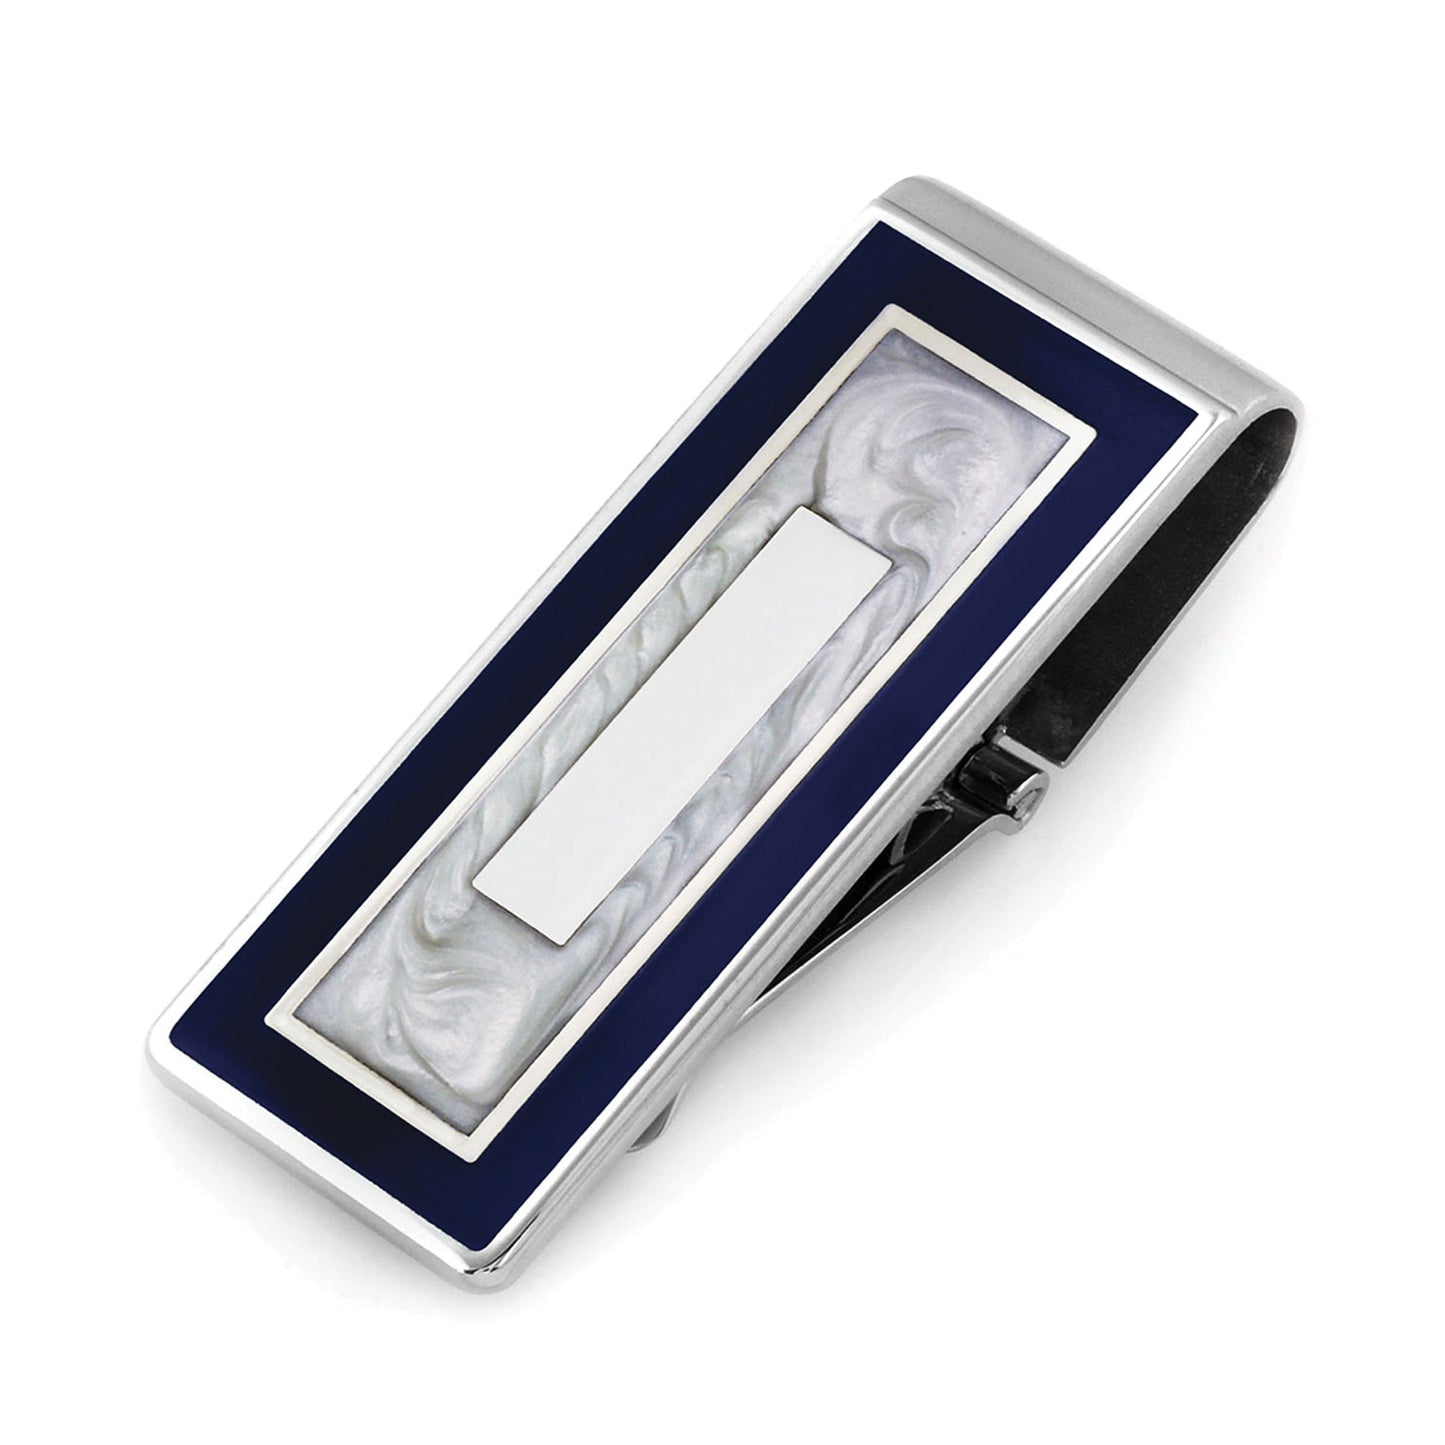 A mother of pearl hinged money clip with blue accent displayed on a neutral white background.